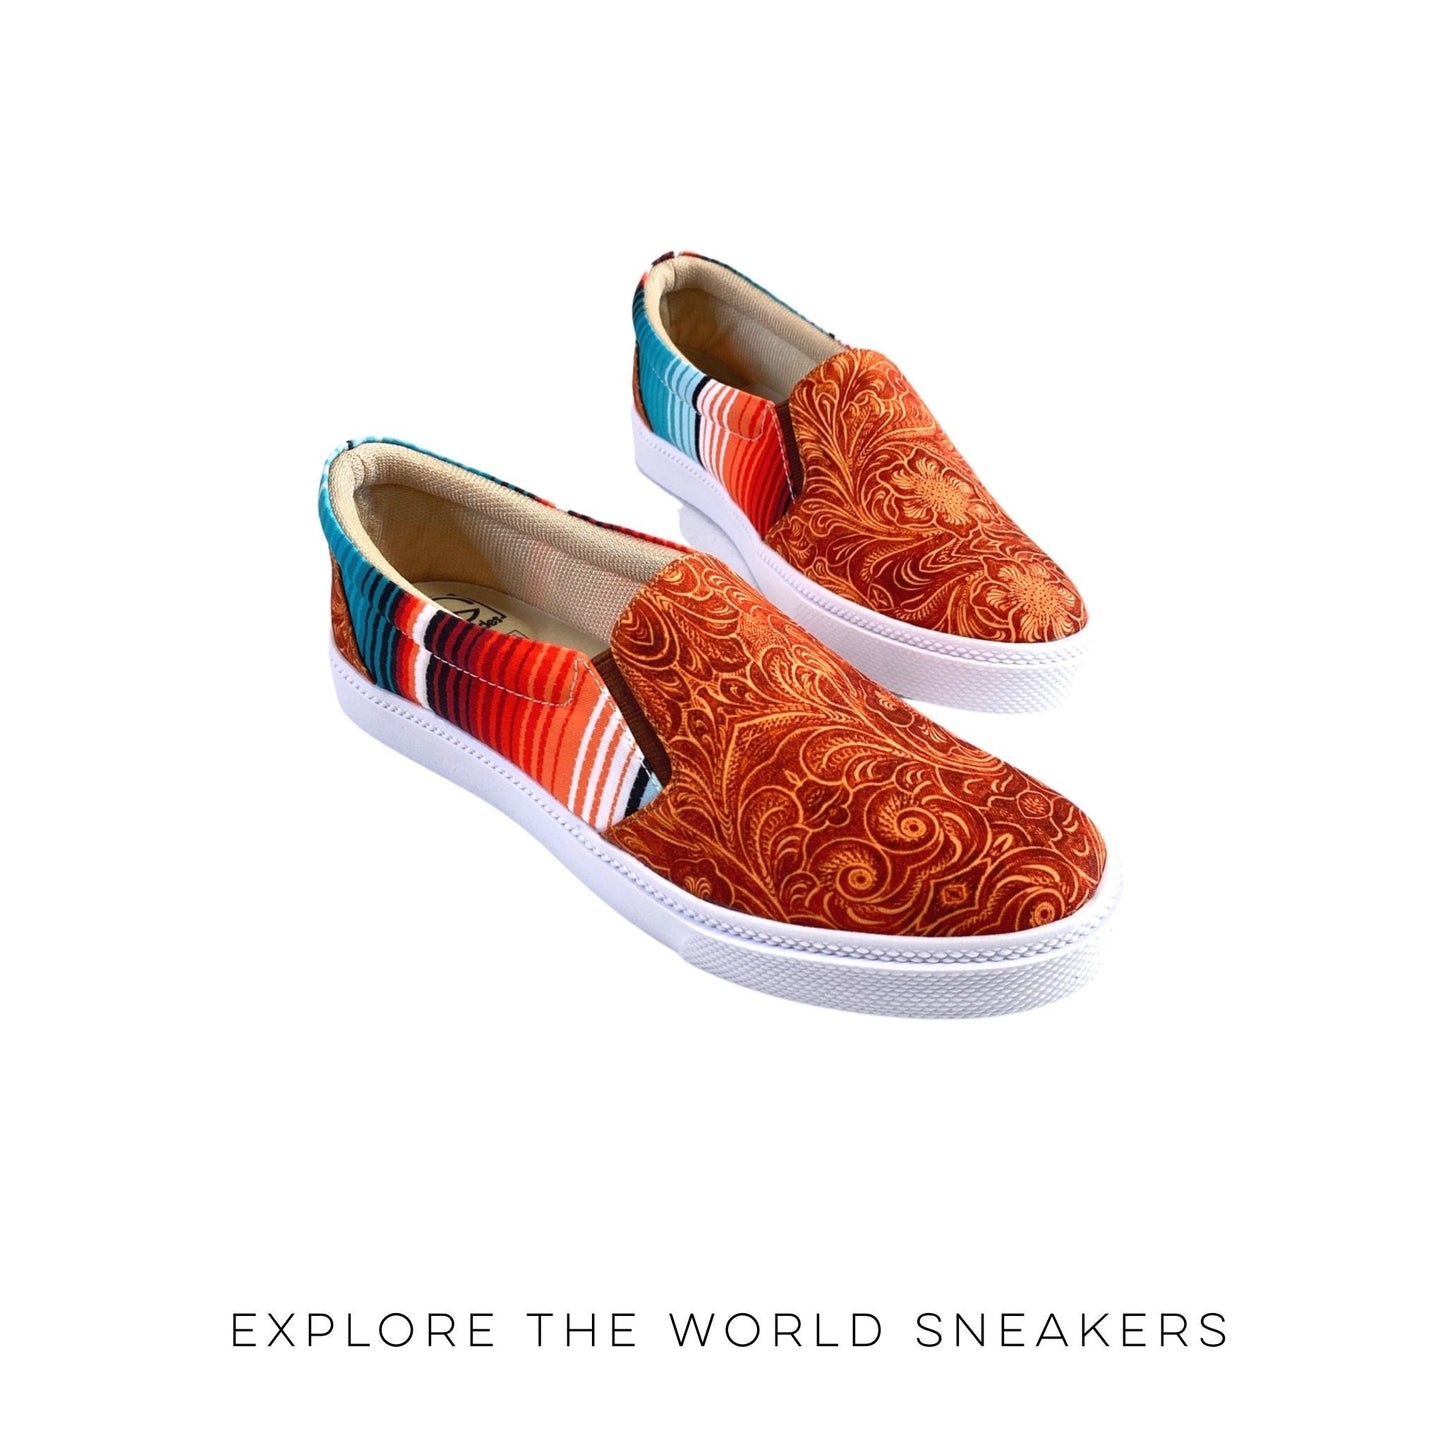 Explore the World Sneakers!